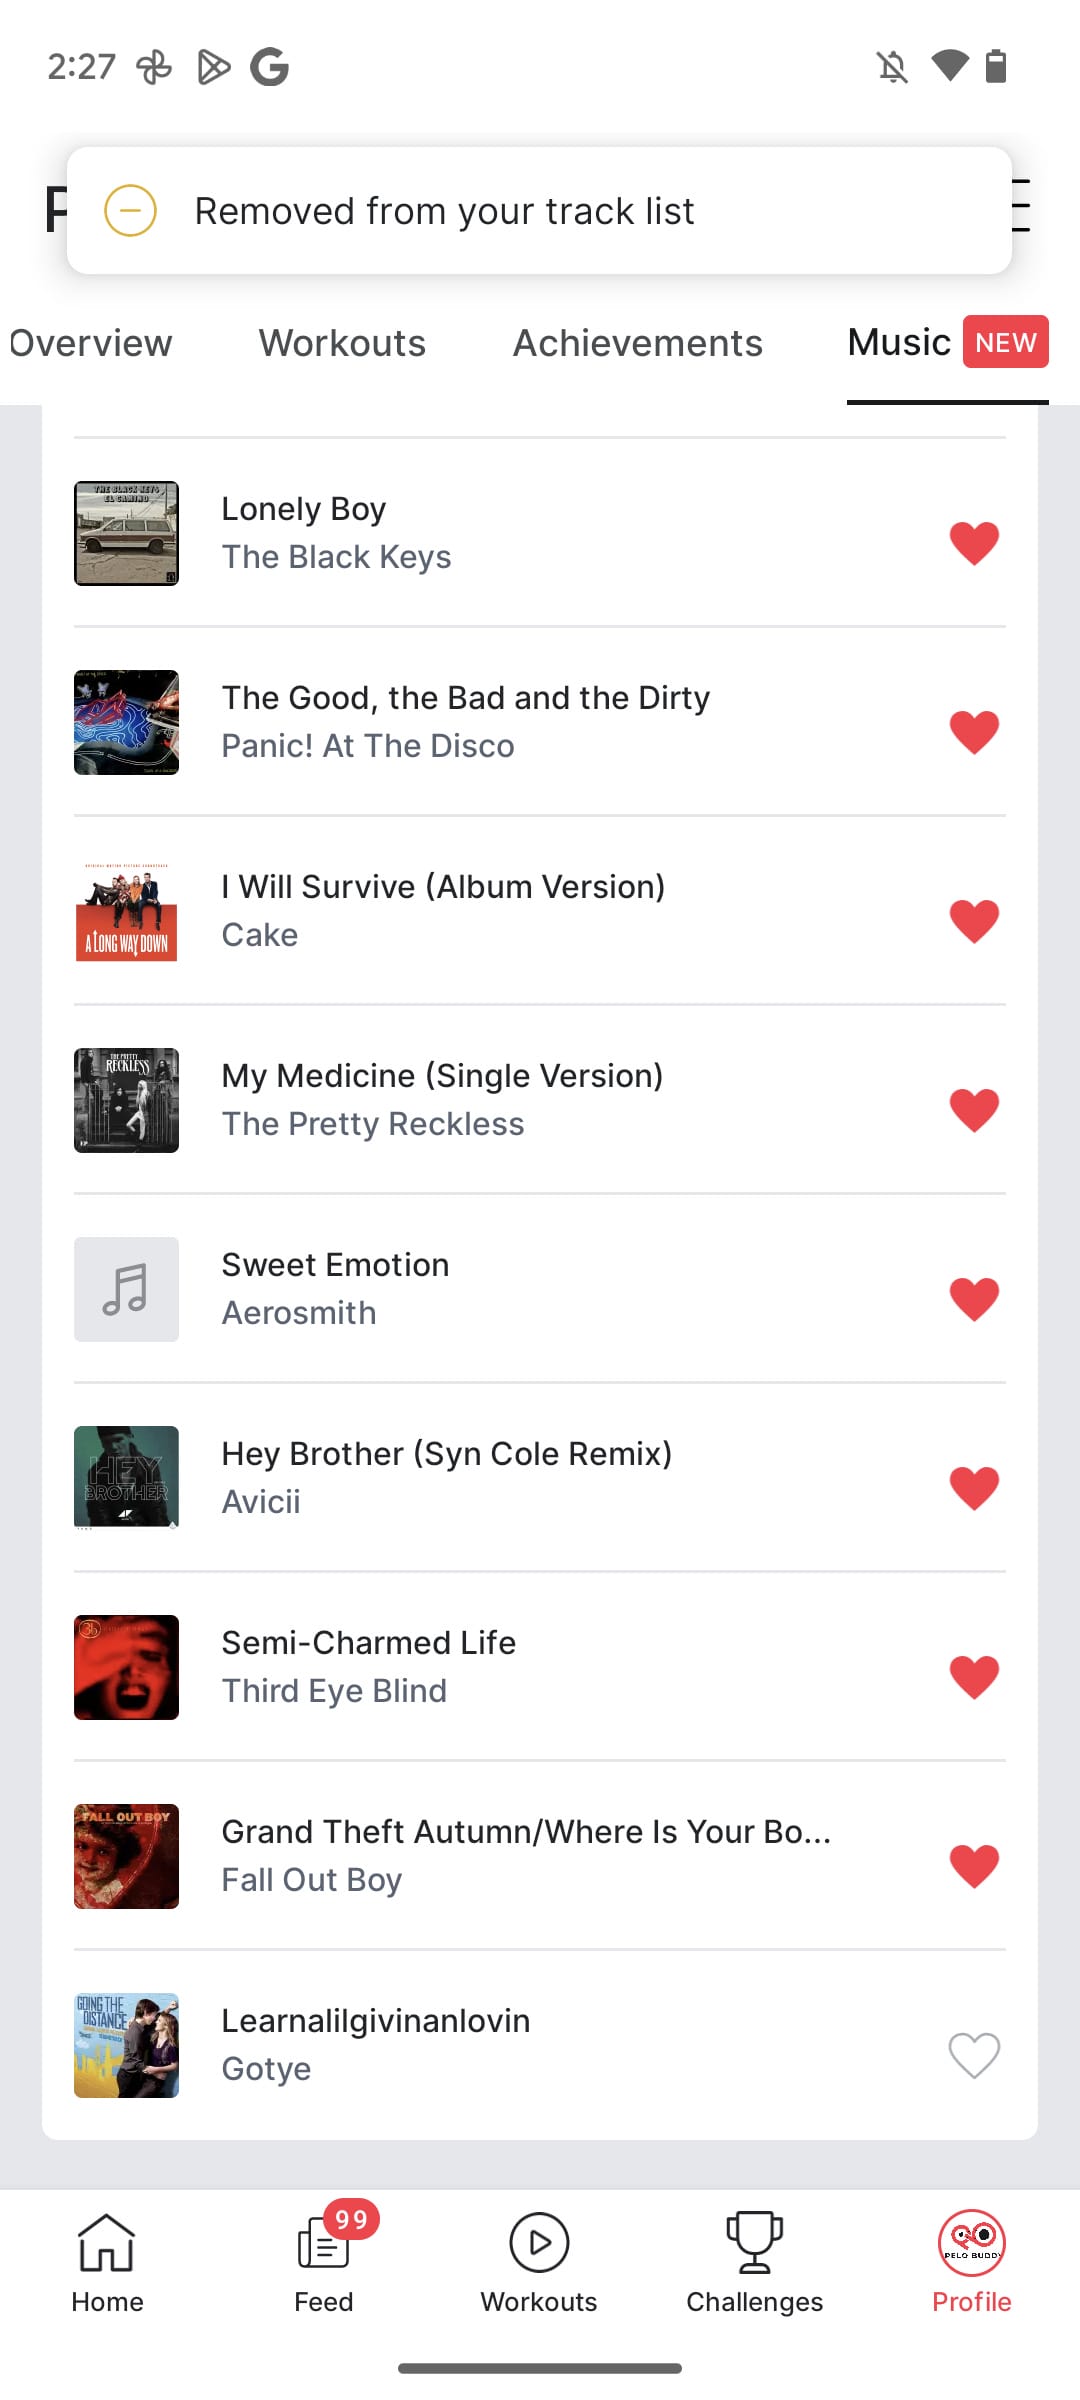 Managing saved songs via profile in the Android app.